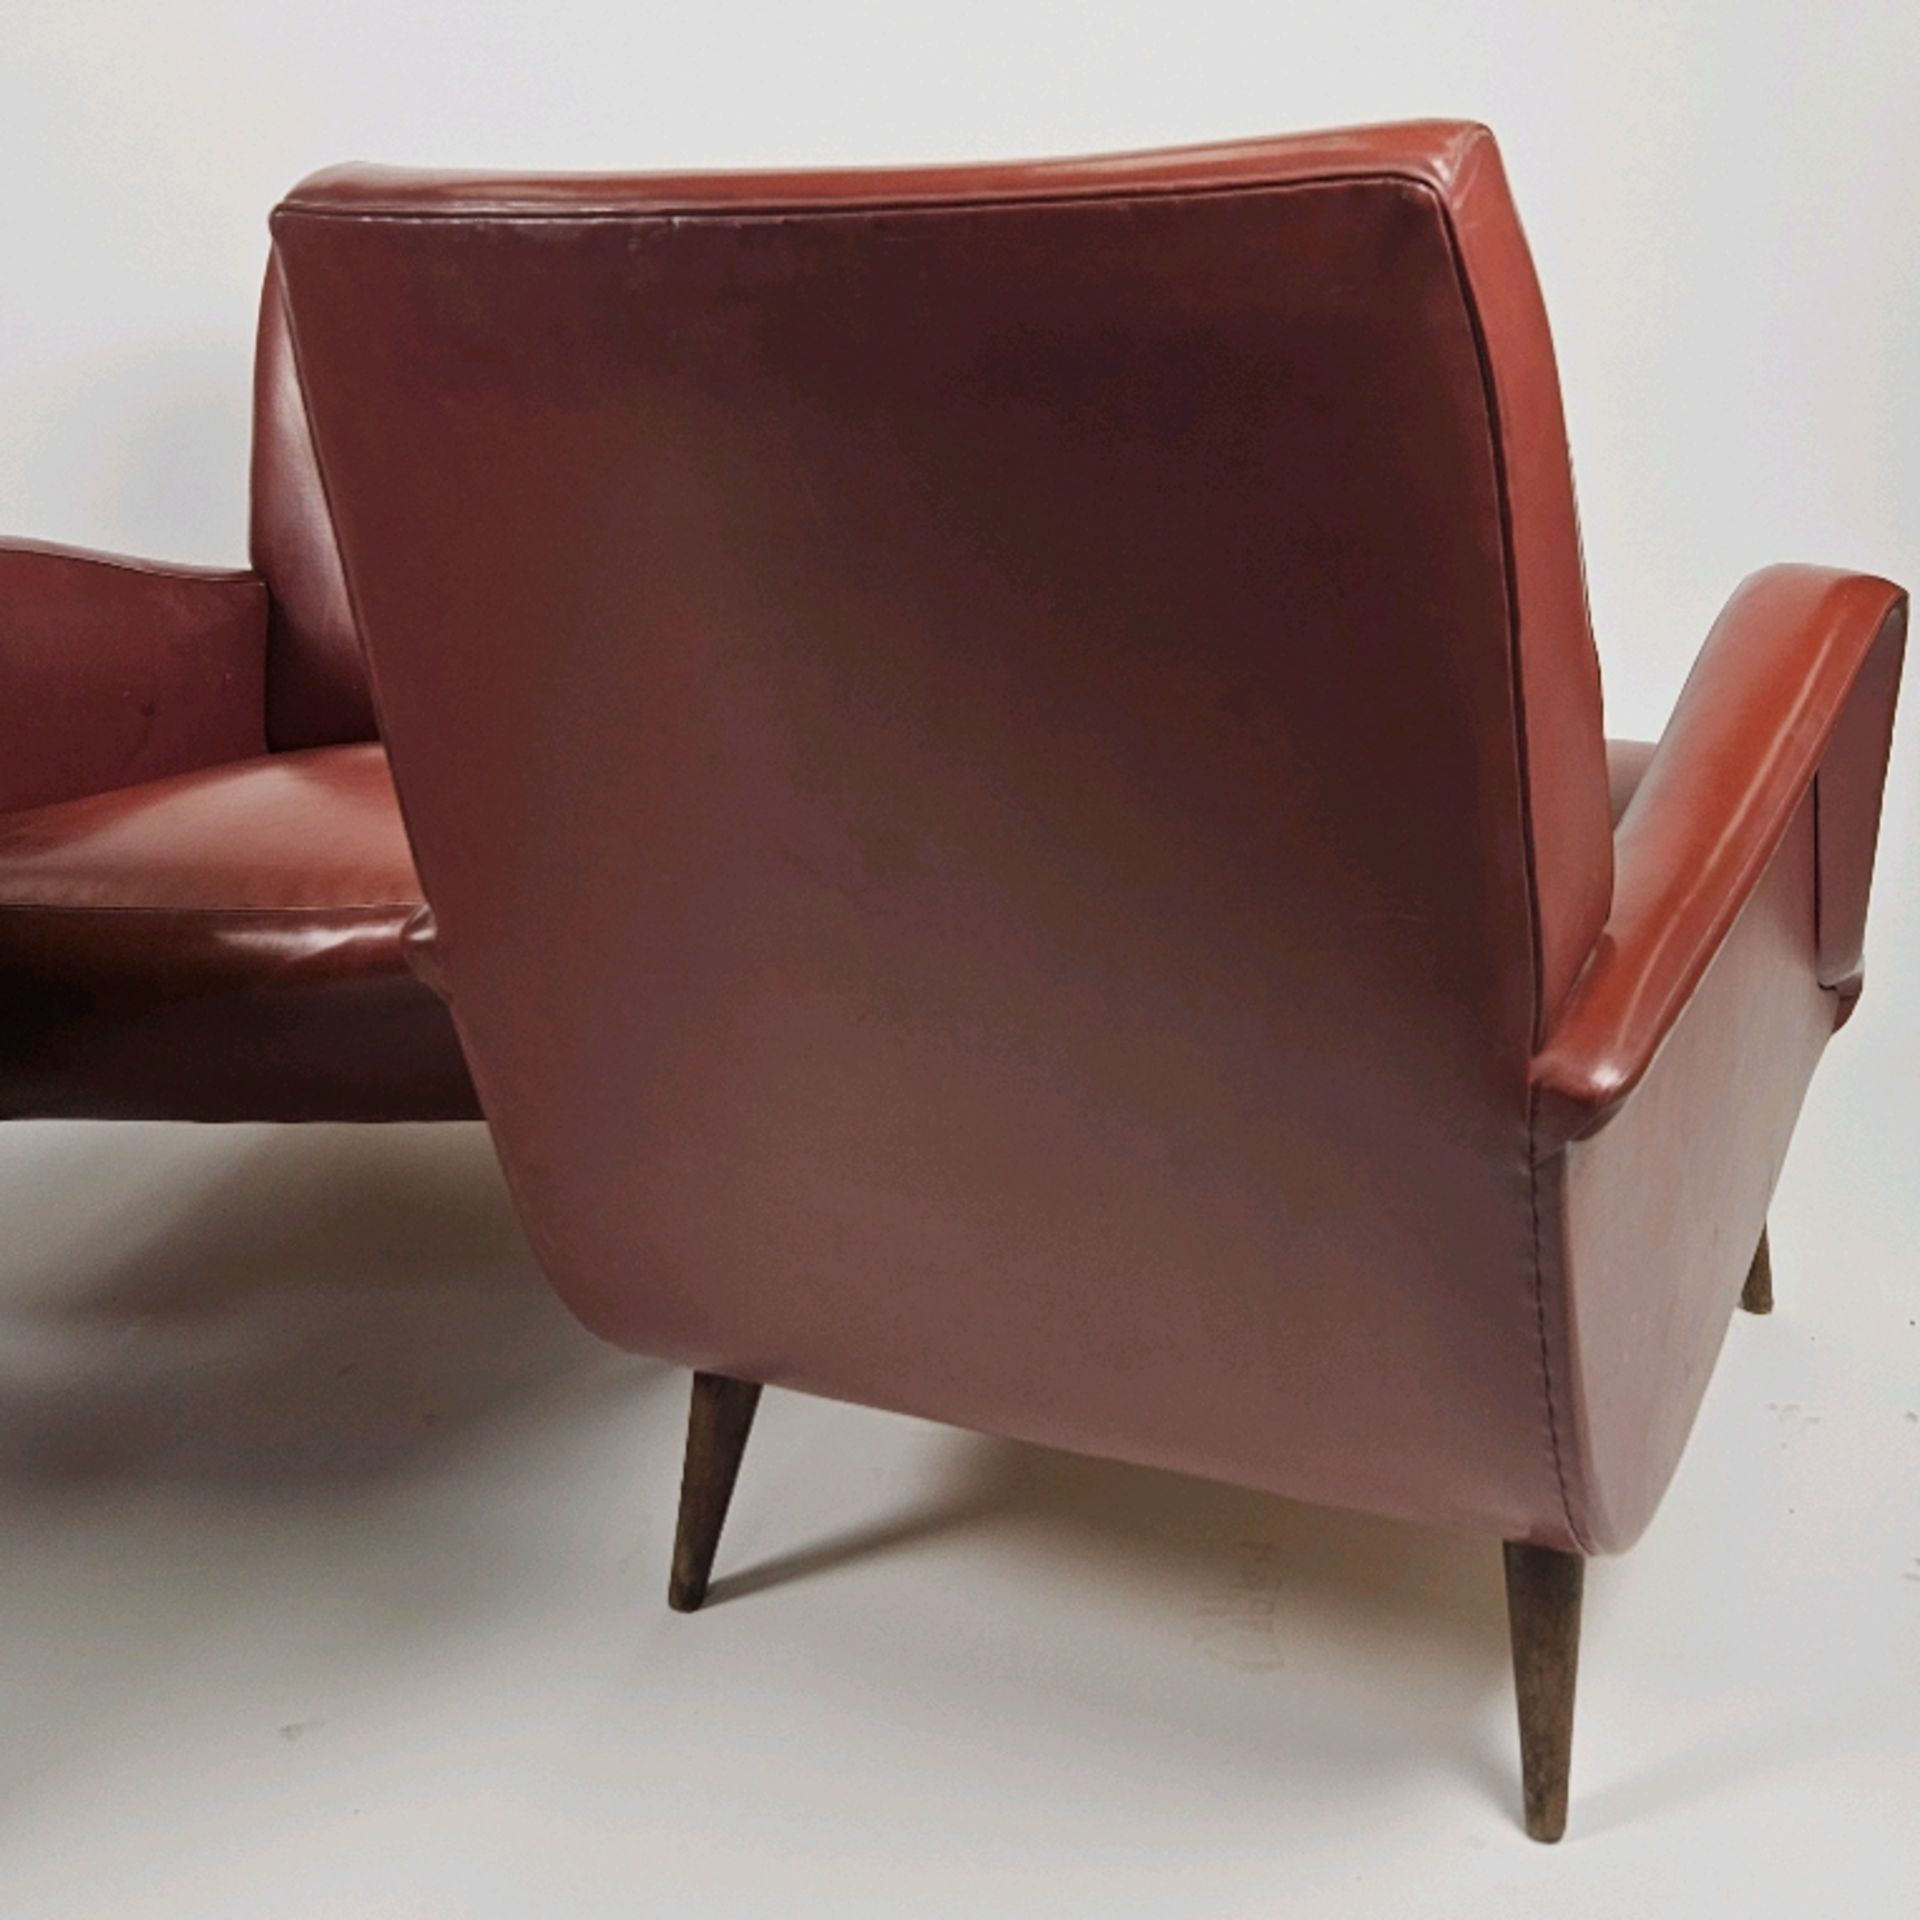 Trio of Faux Leather Accent Chairs - Image 7 of 7